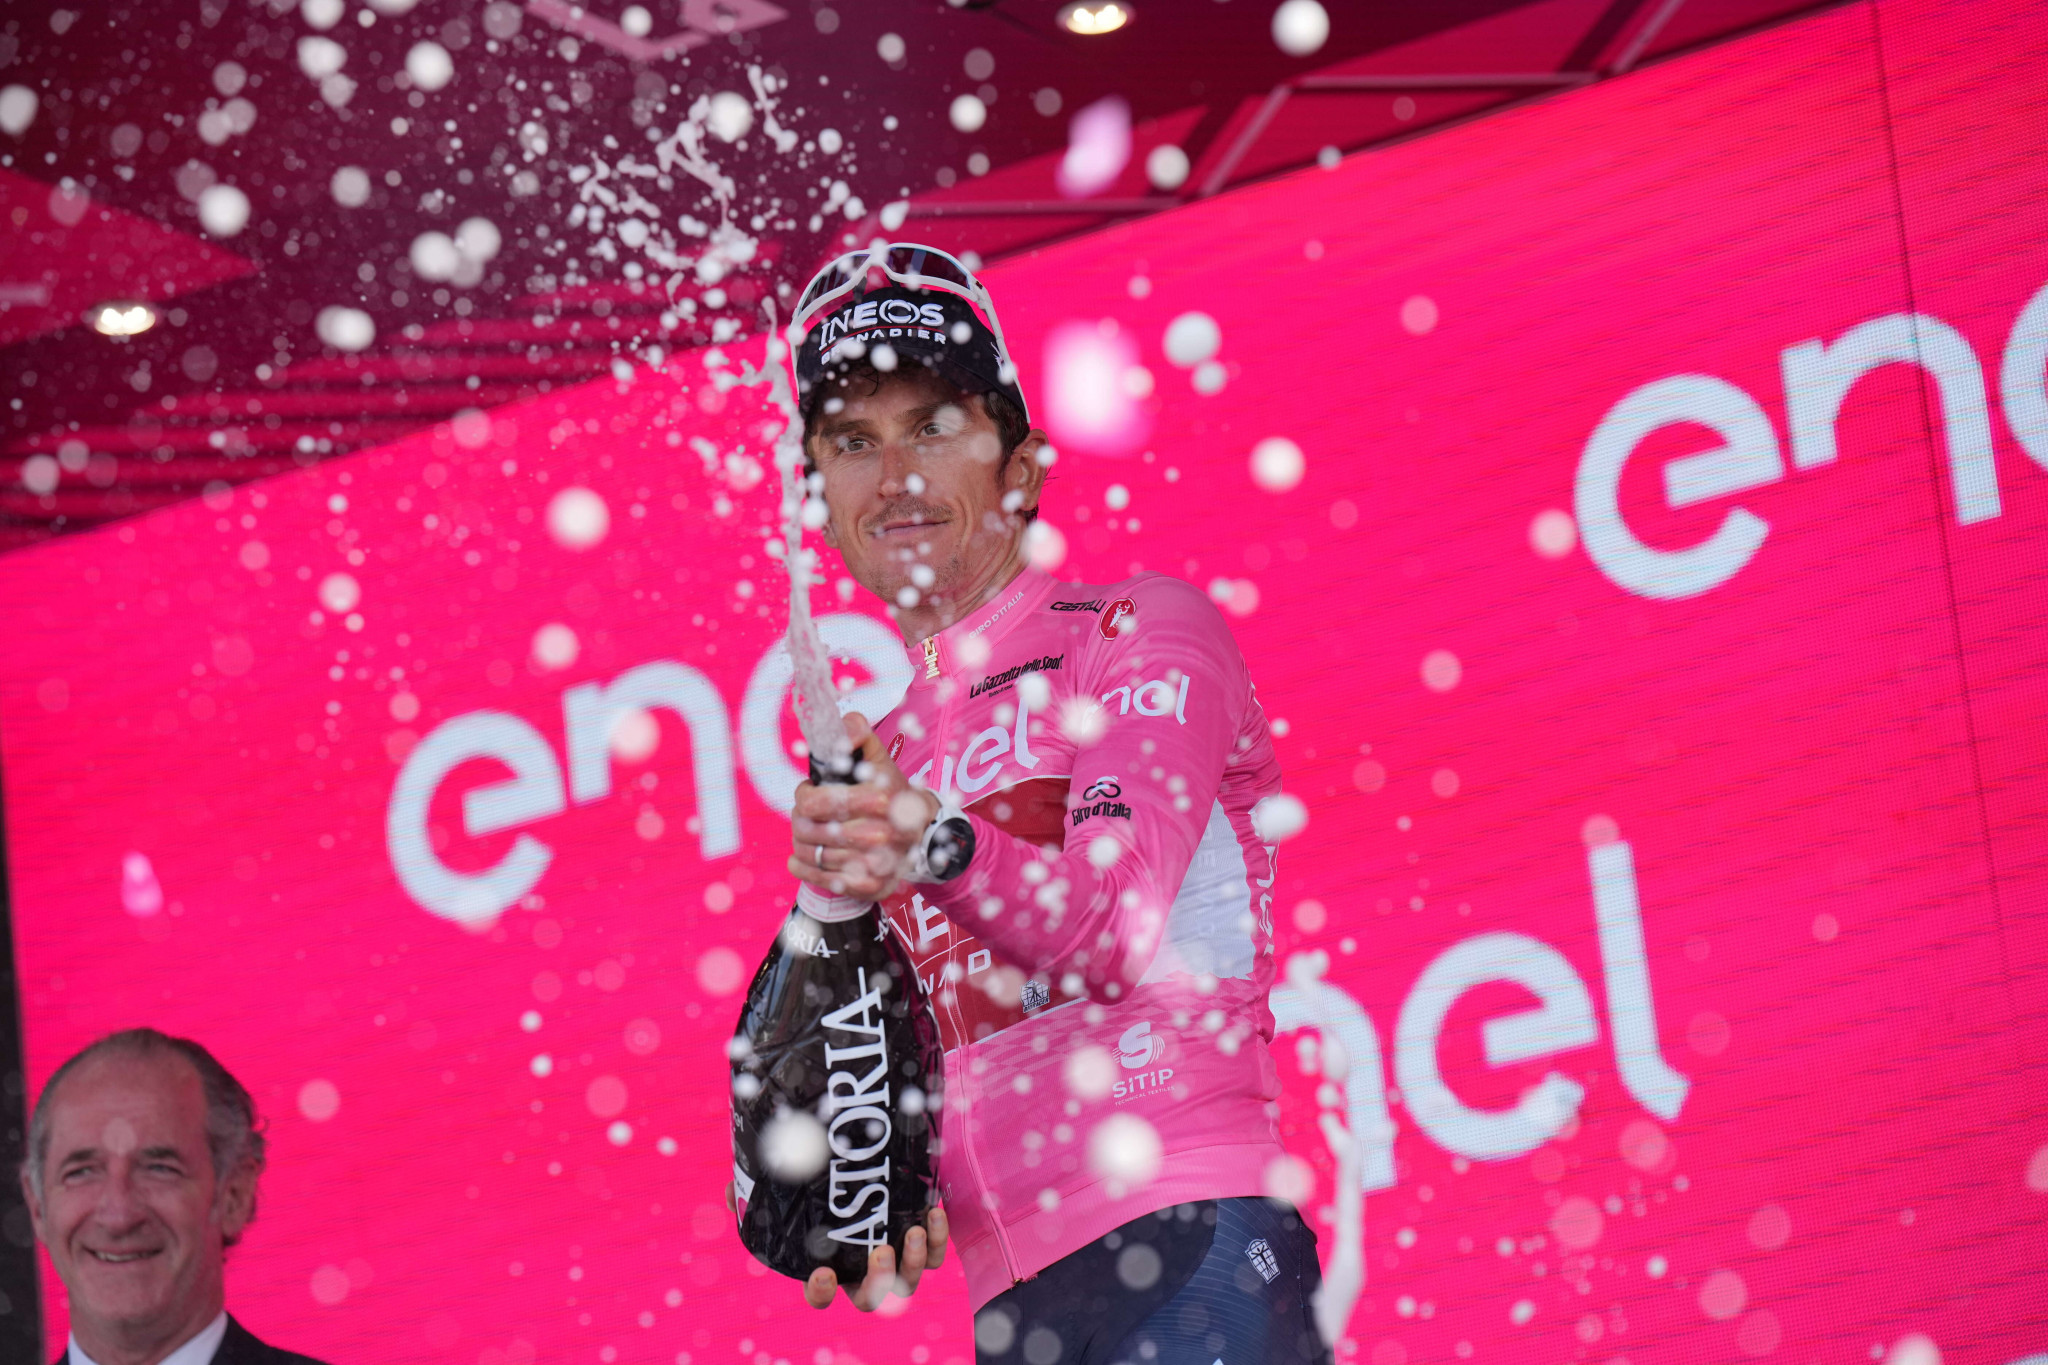 Geraint Thomas retained the Maglia Rosa after a quiet day at the Giro d'Italia before the mountains that are to come ©Getty Images